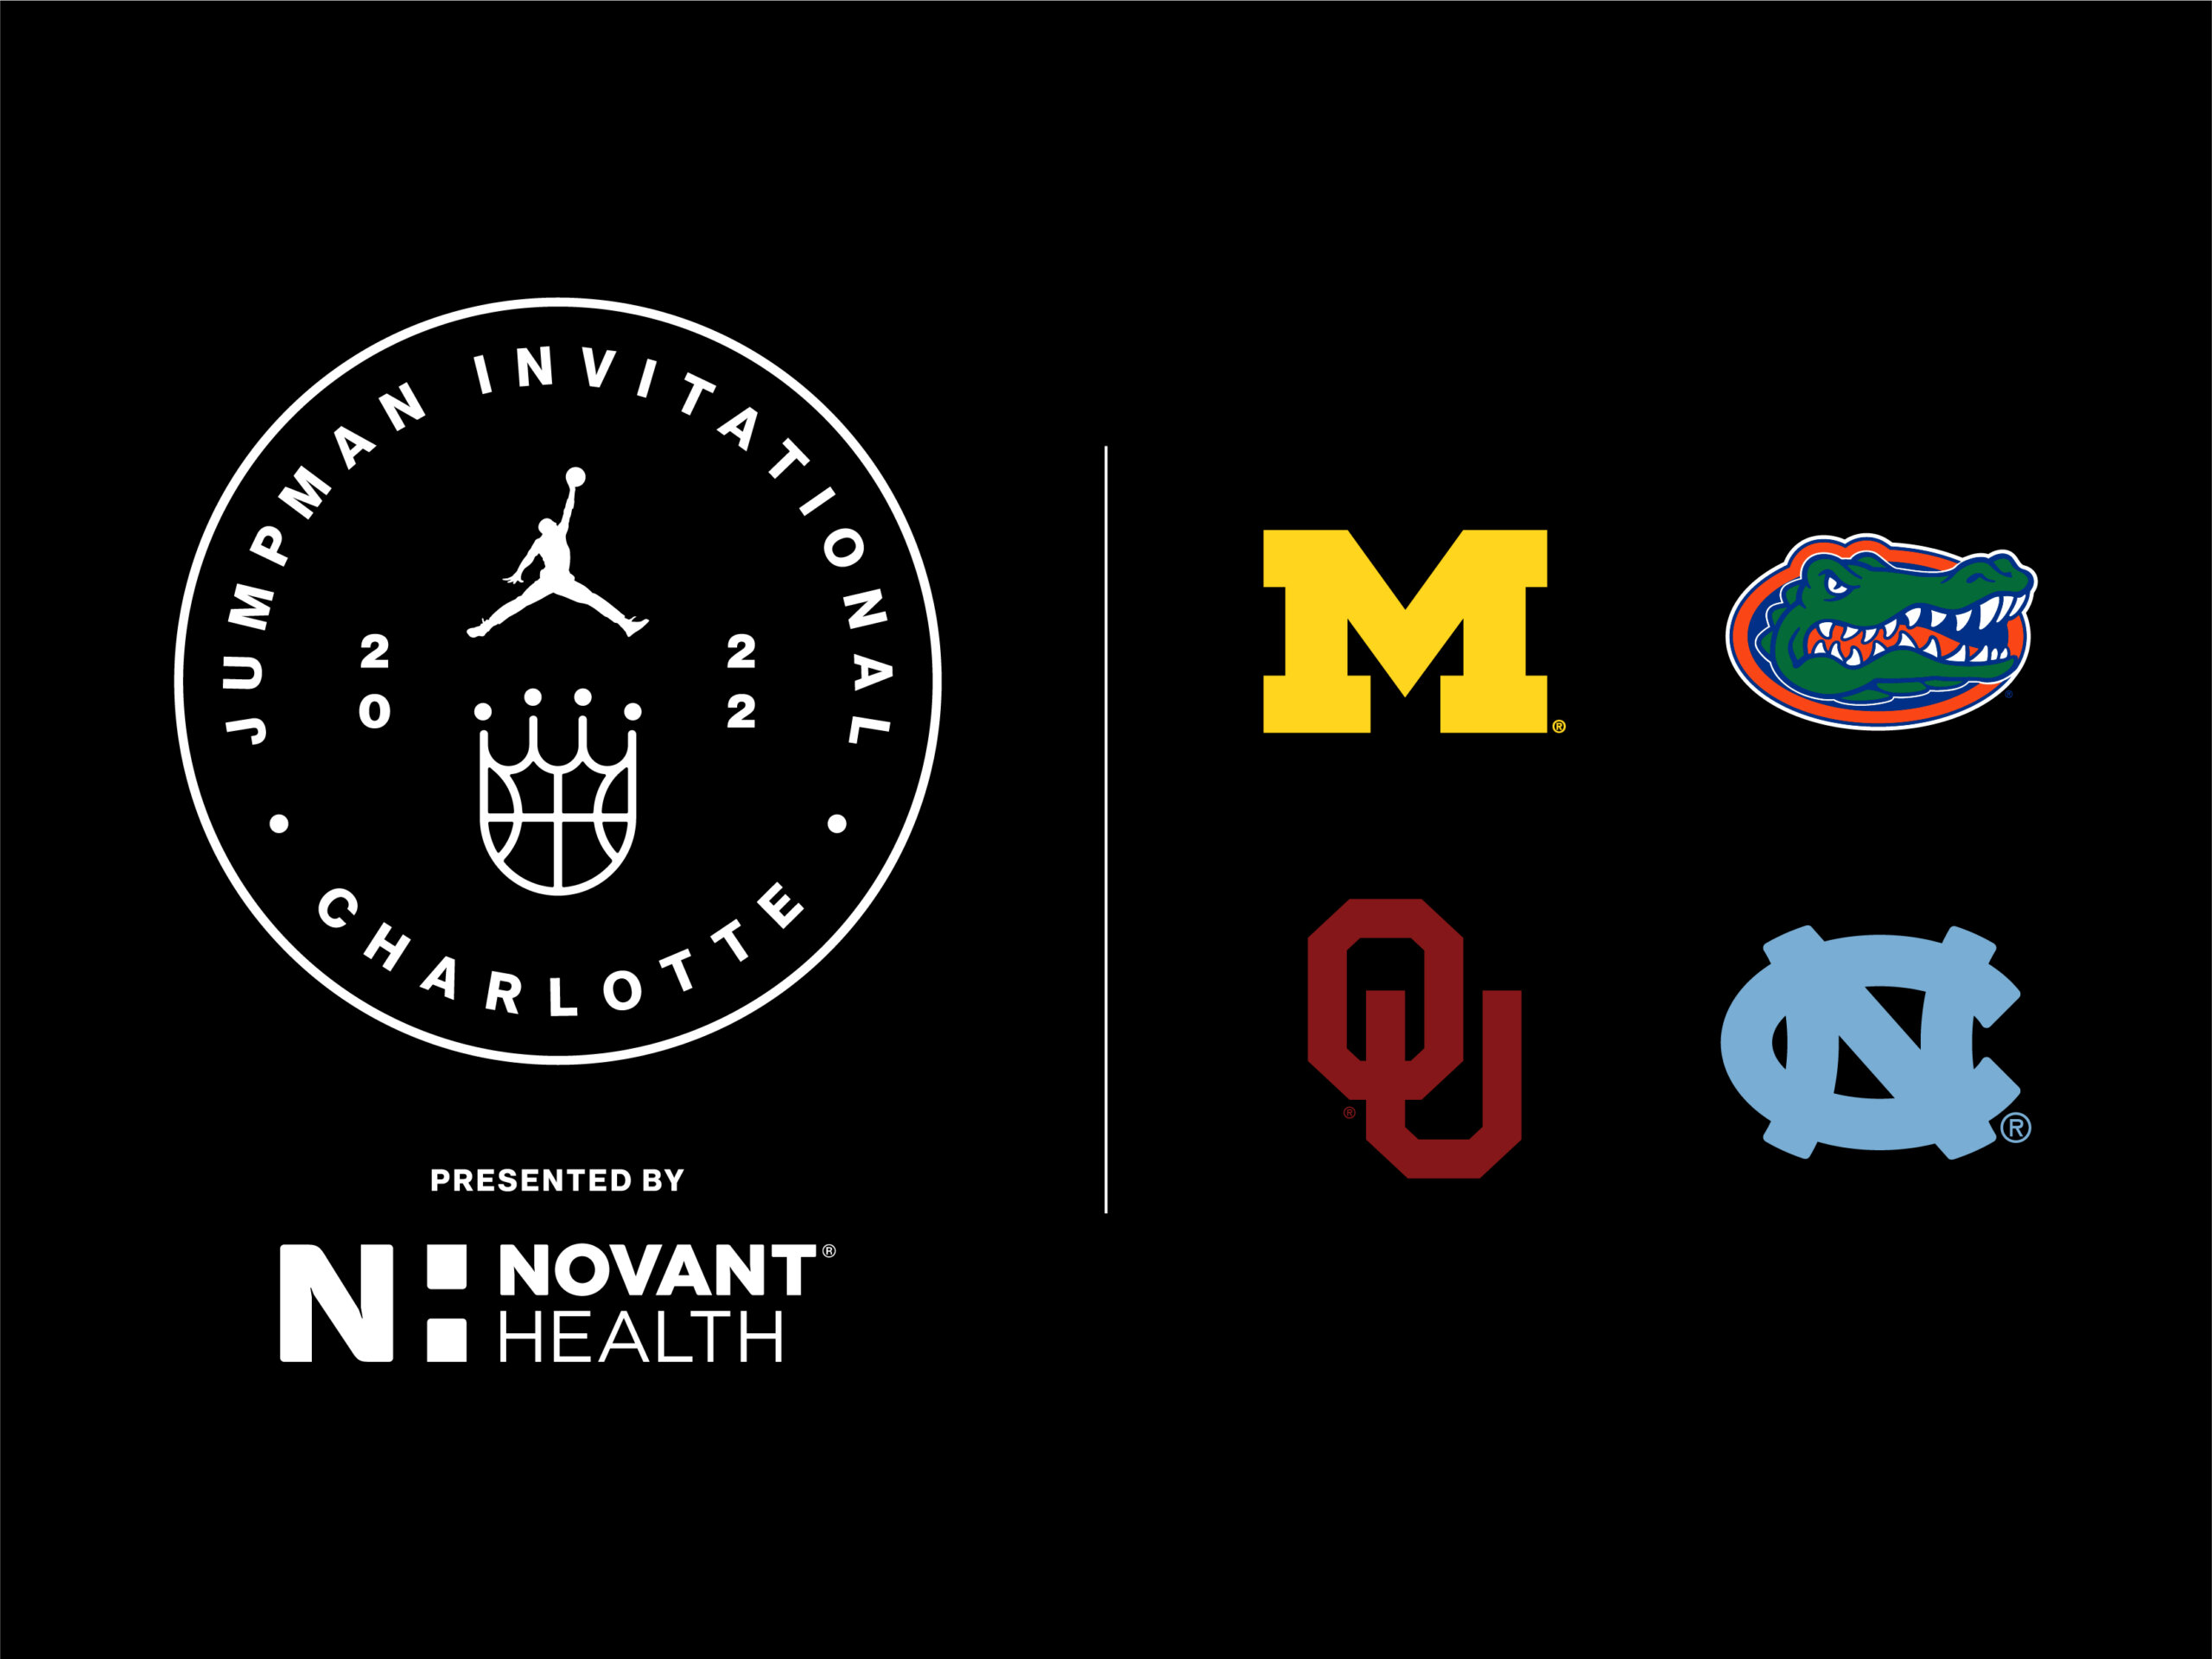 Charlotte Sports Foundation Announces Tickets On Sale for Jumpman Invitational Presented By Novant Health